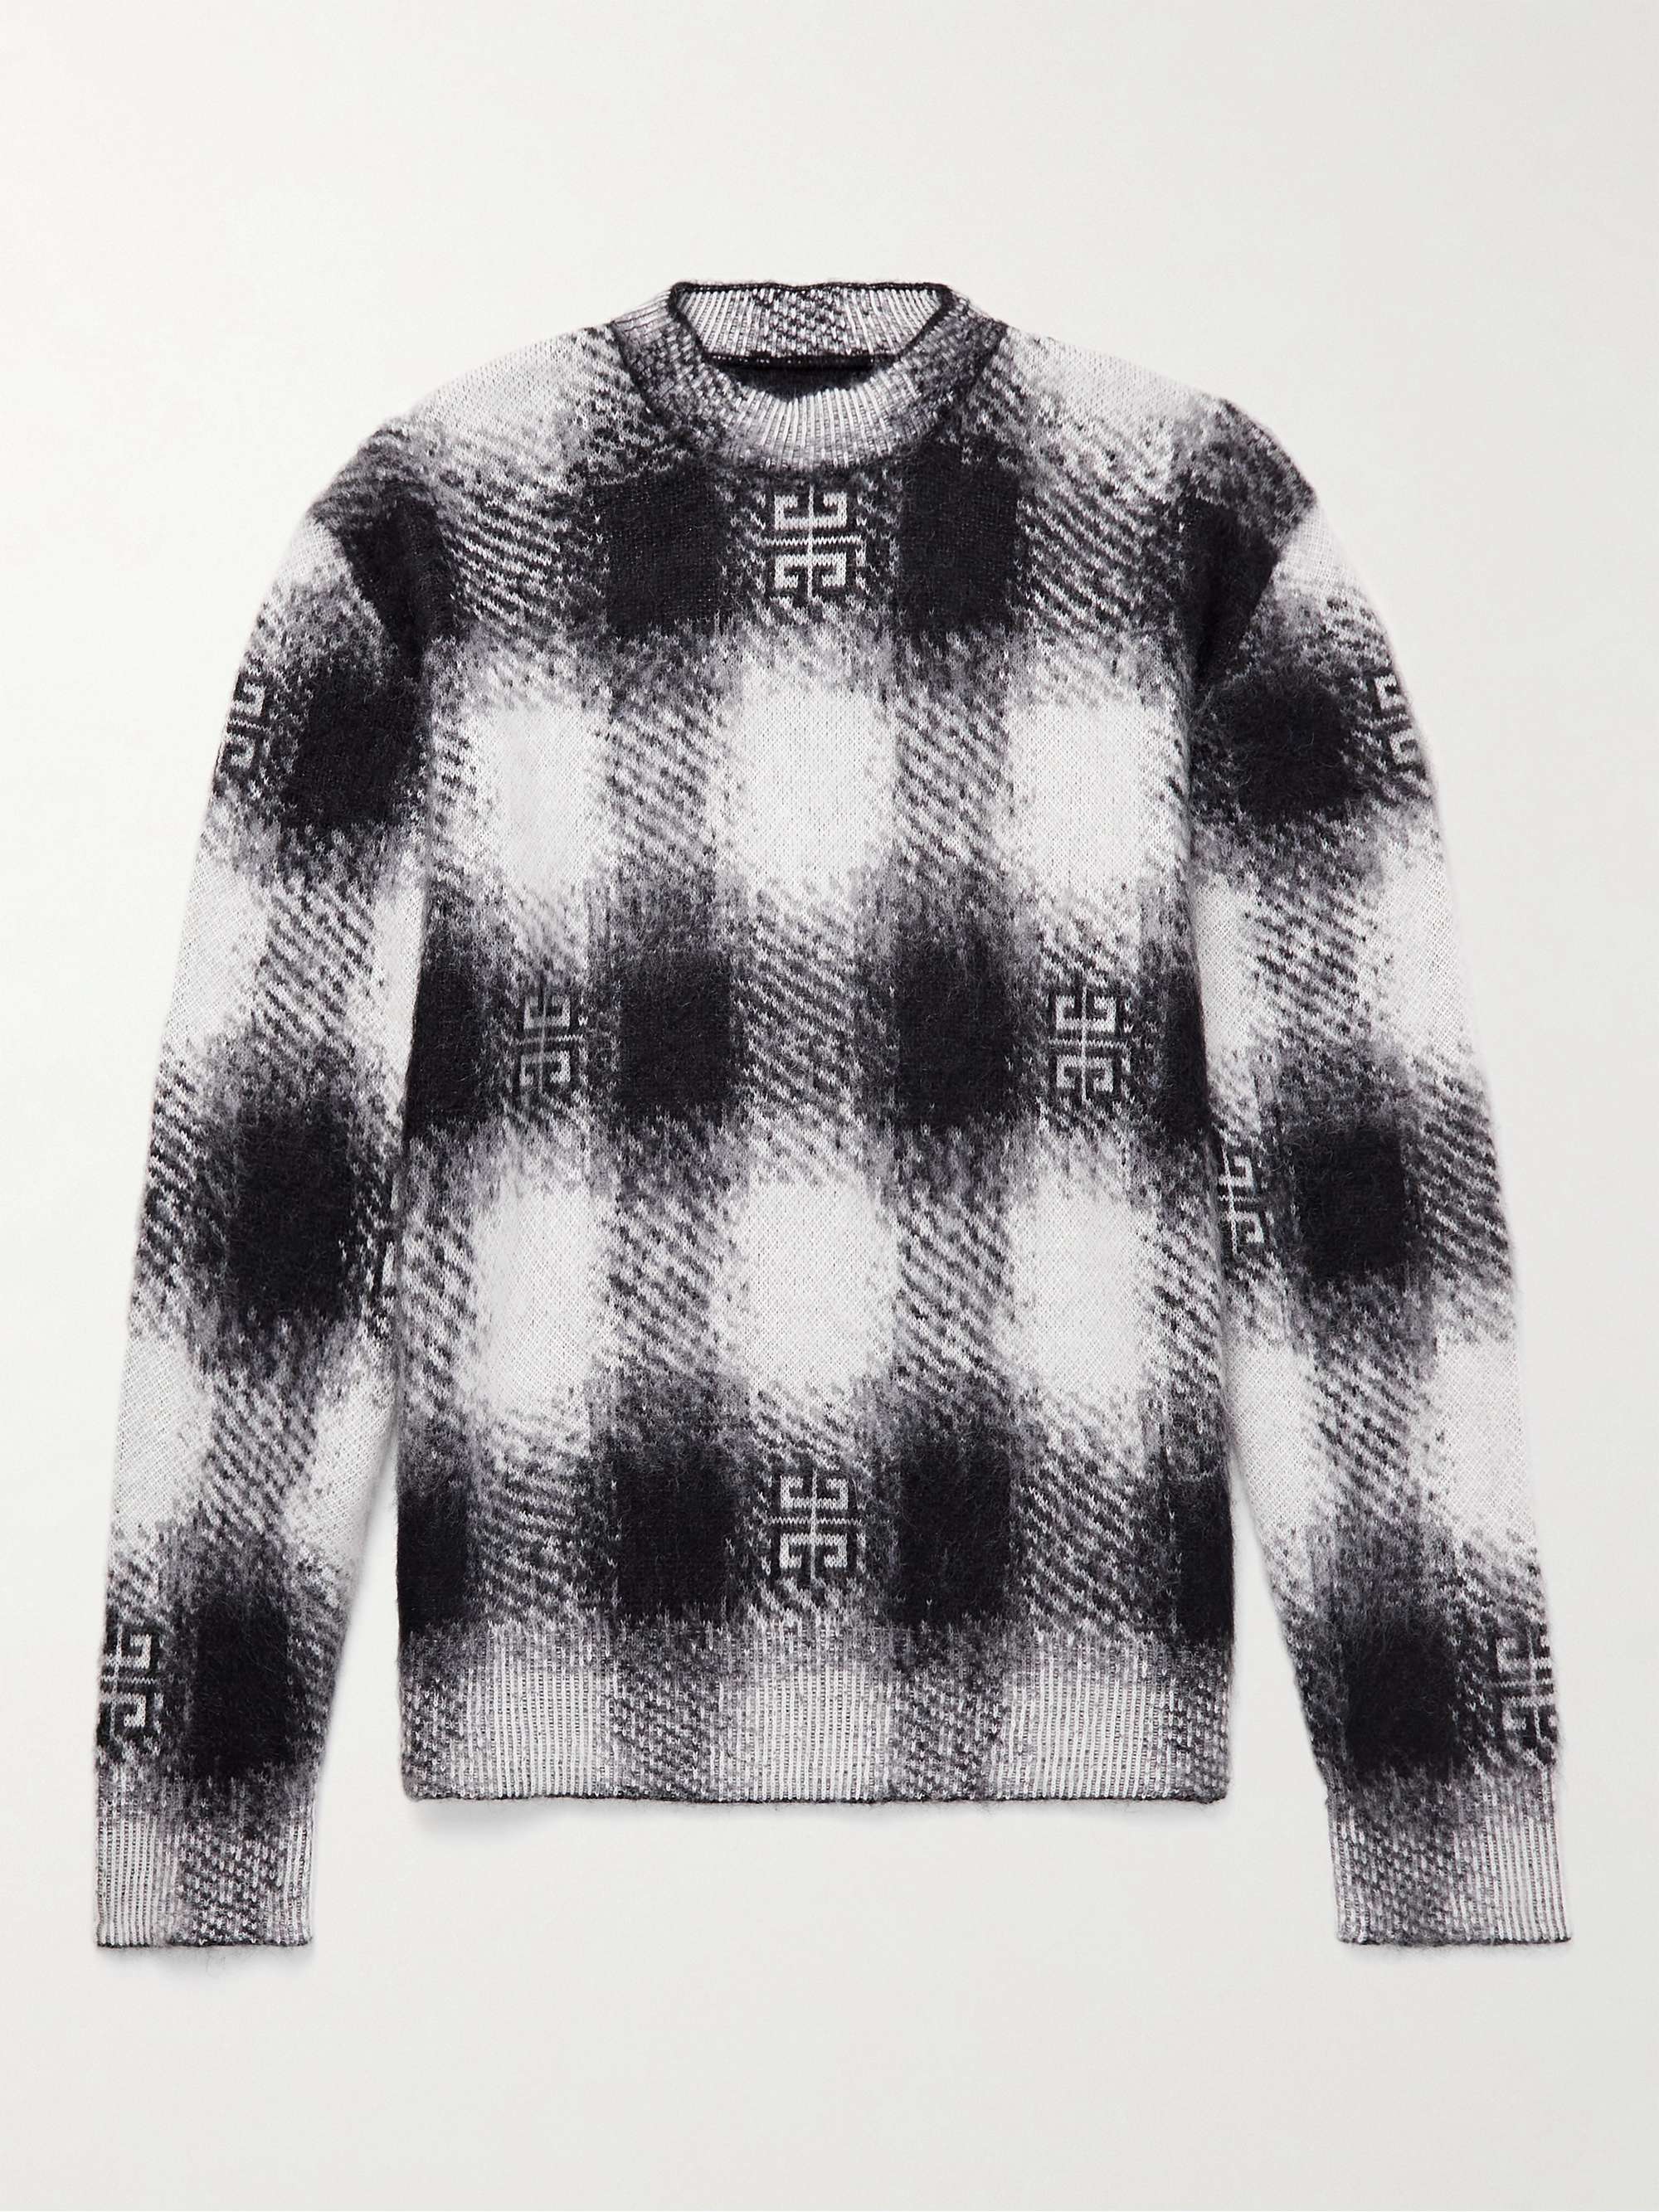 GIVENCHY Logo-Jacquard Knitted Sweater | MR PORTER